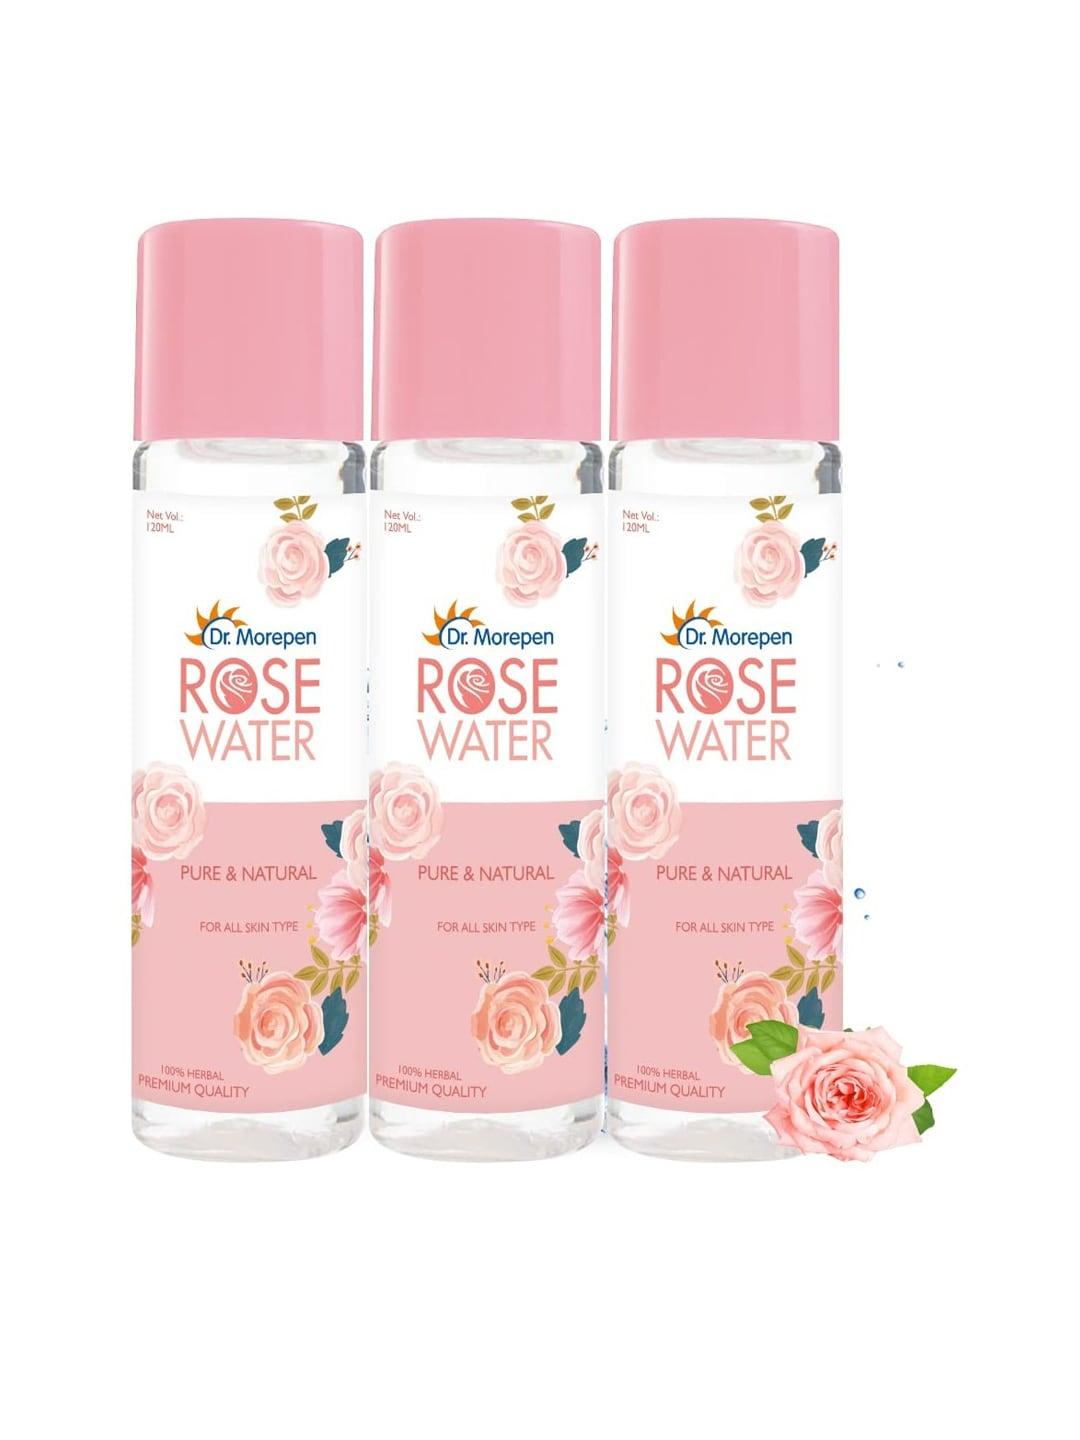 dr. morepen set of 3 pure & natural rose water face toner for all skin types - 120 ml each